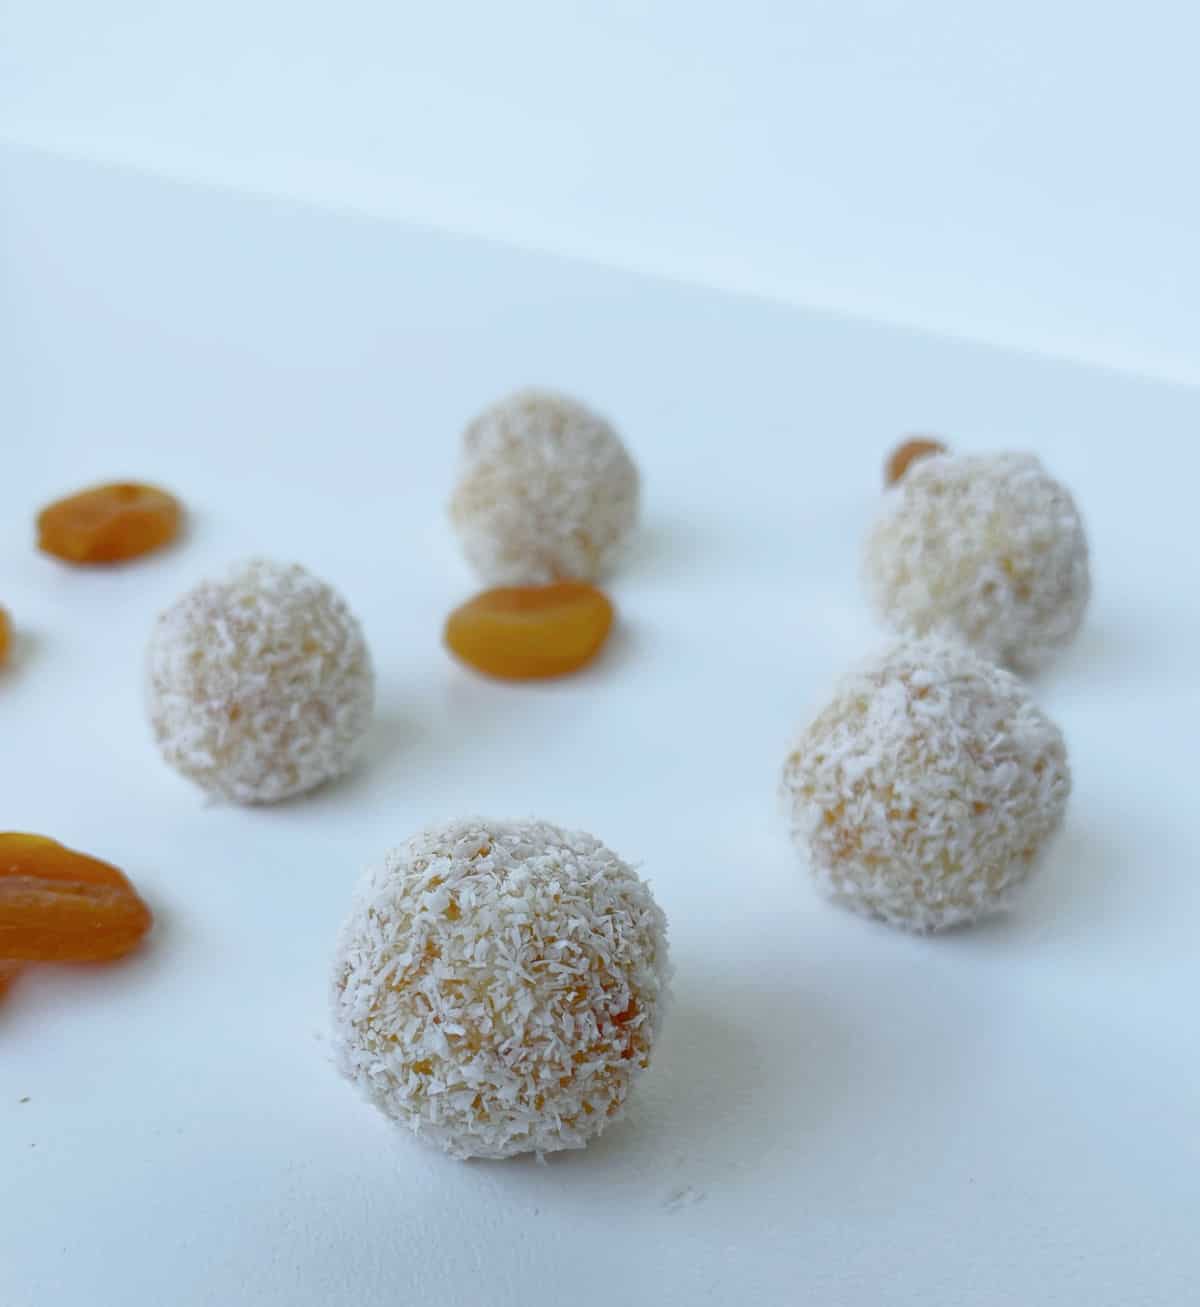 apricot and coconut balls on white background.